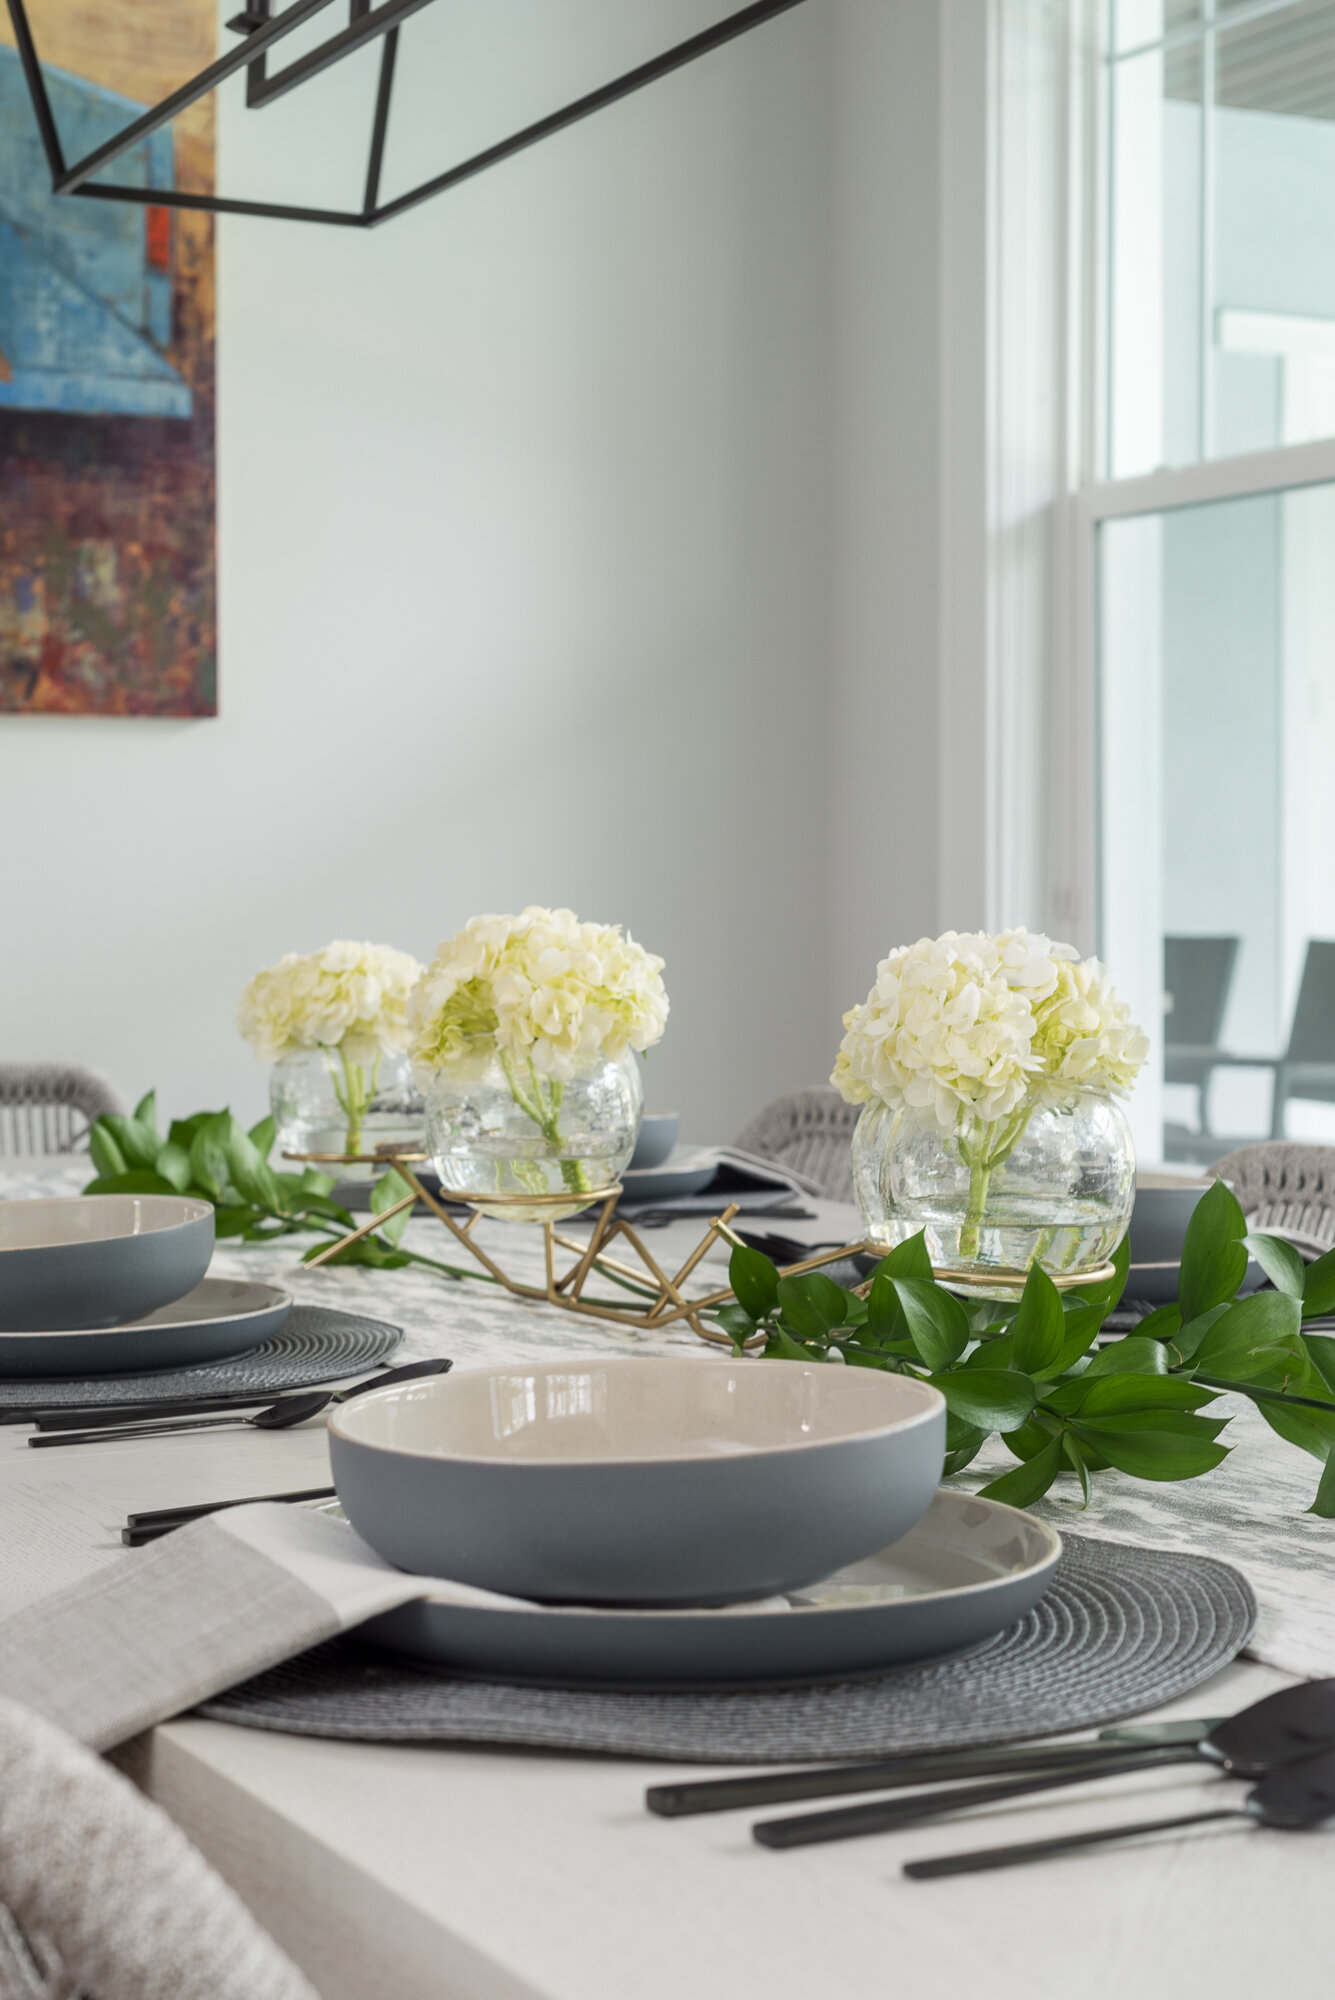 Dining room table scape with white flowers and black silverware 